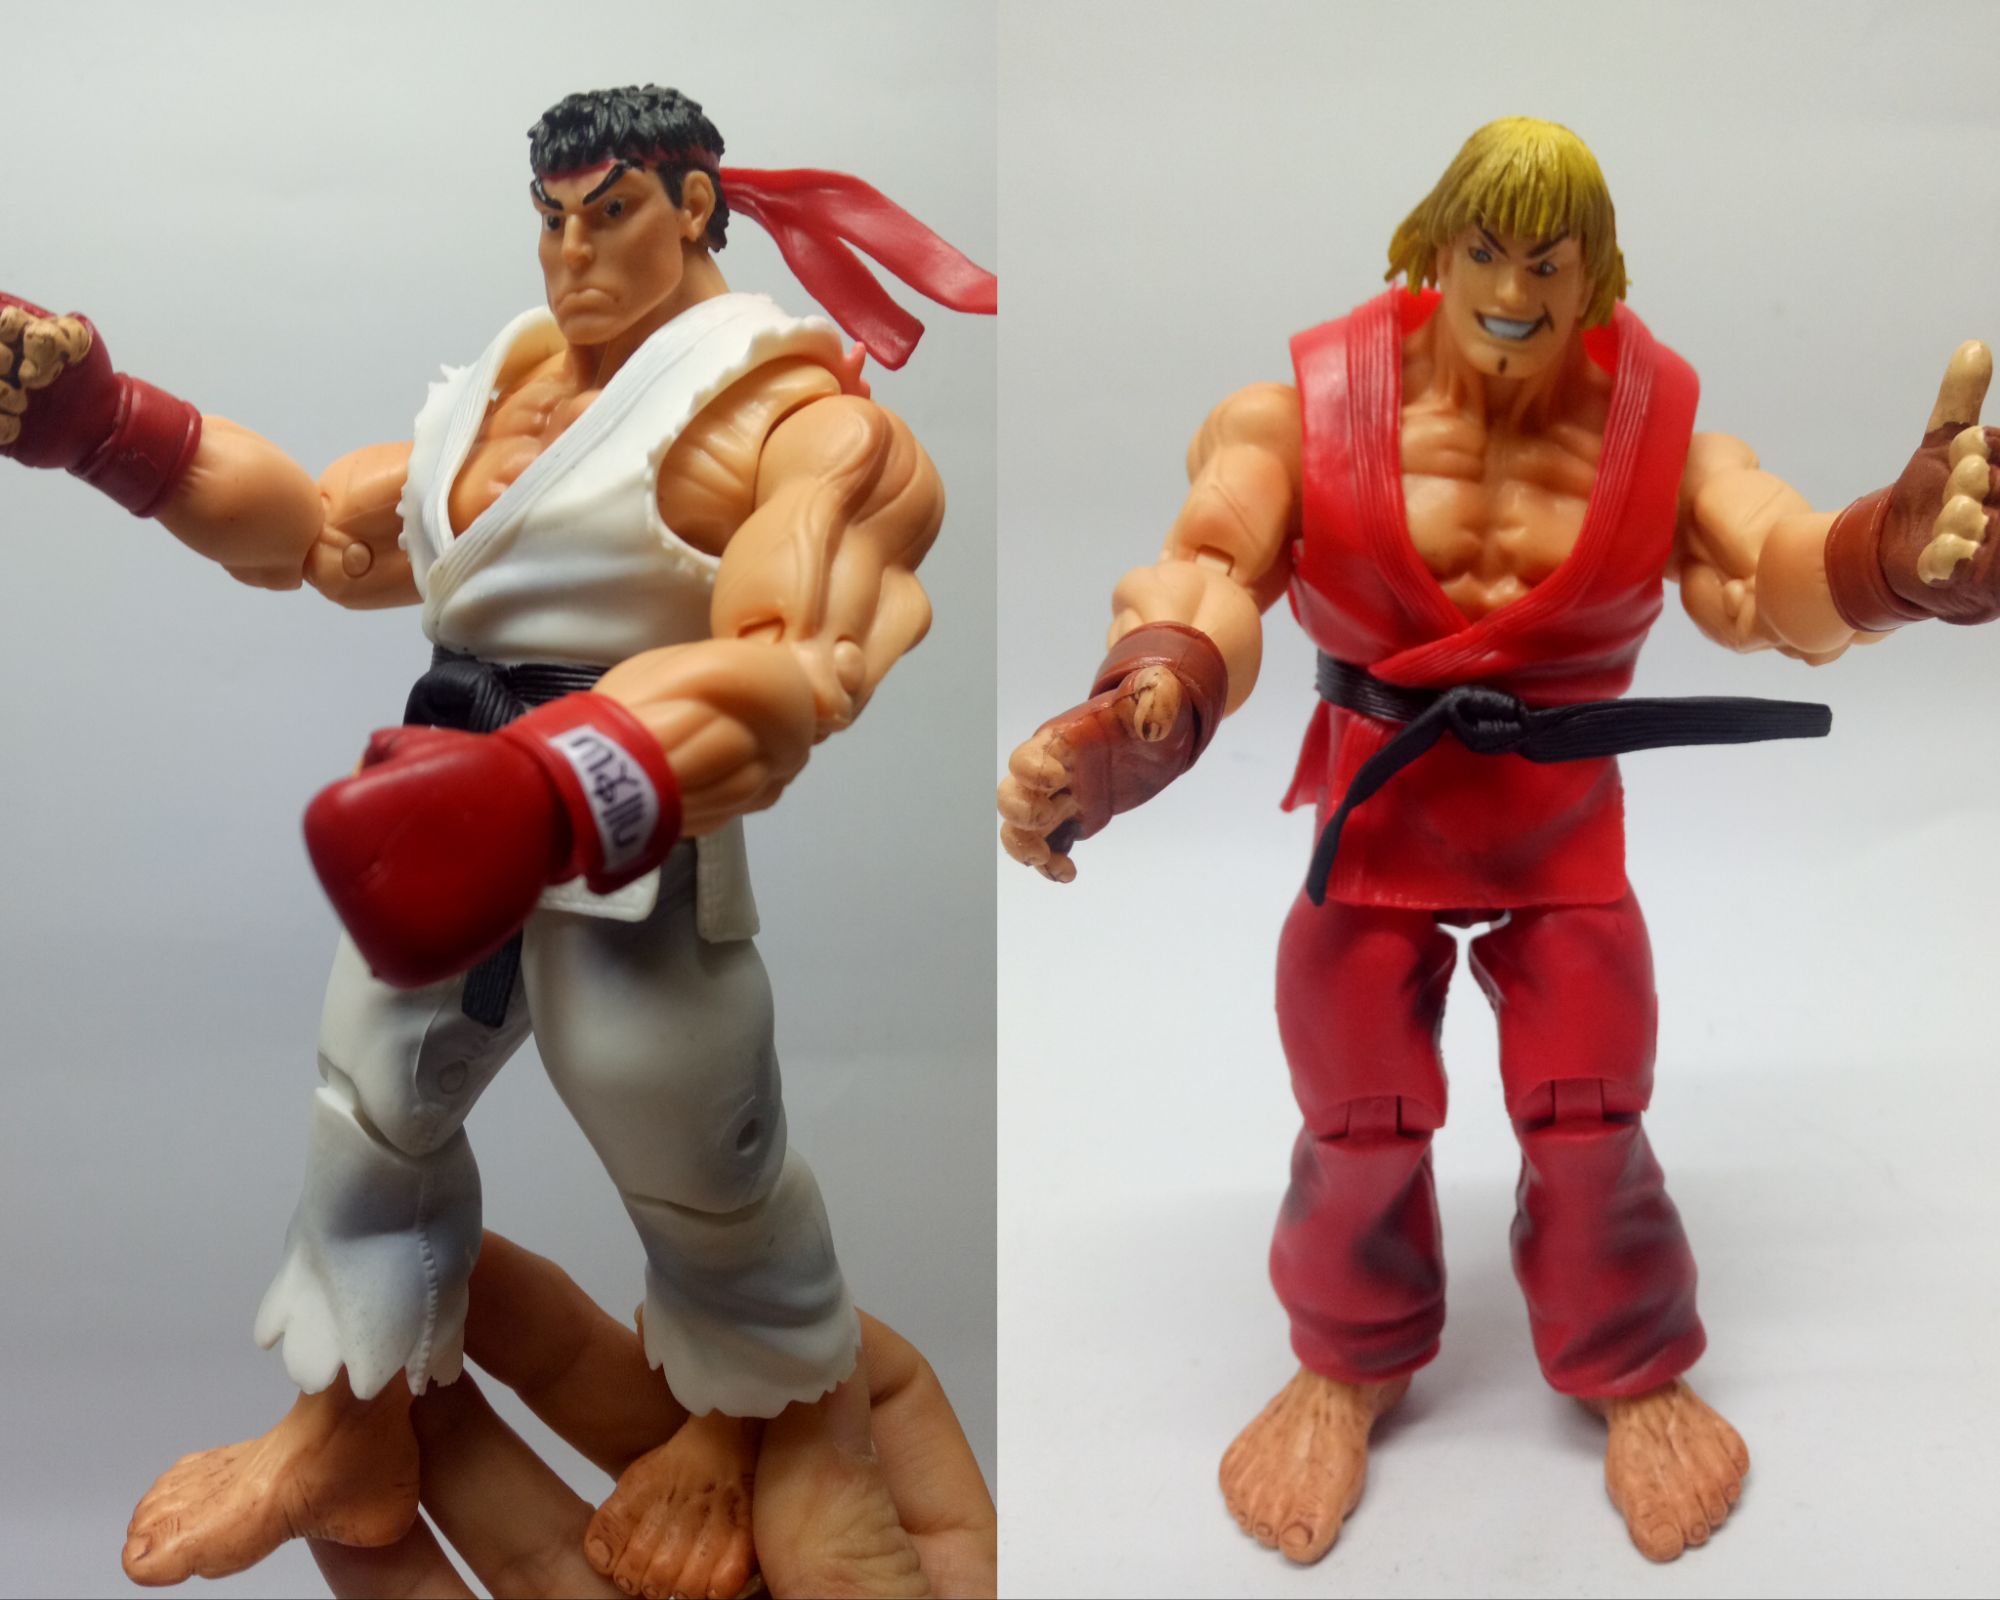 Street fighter Ryu and Ken action figure collectibles toys display Toy high  quality materials